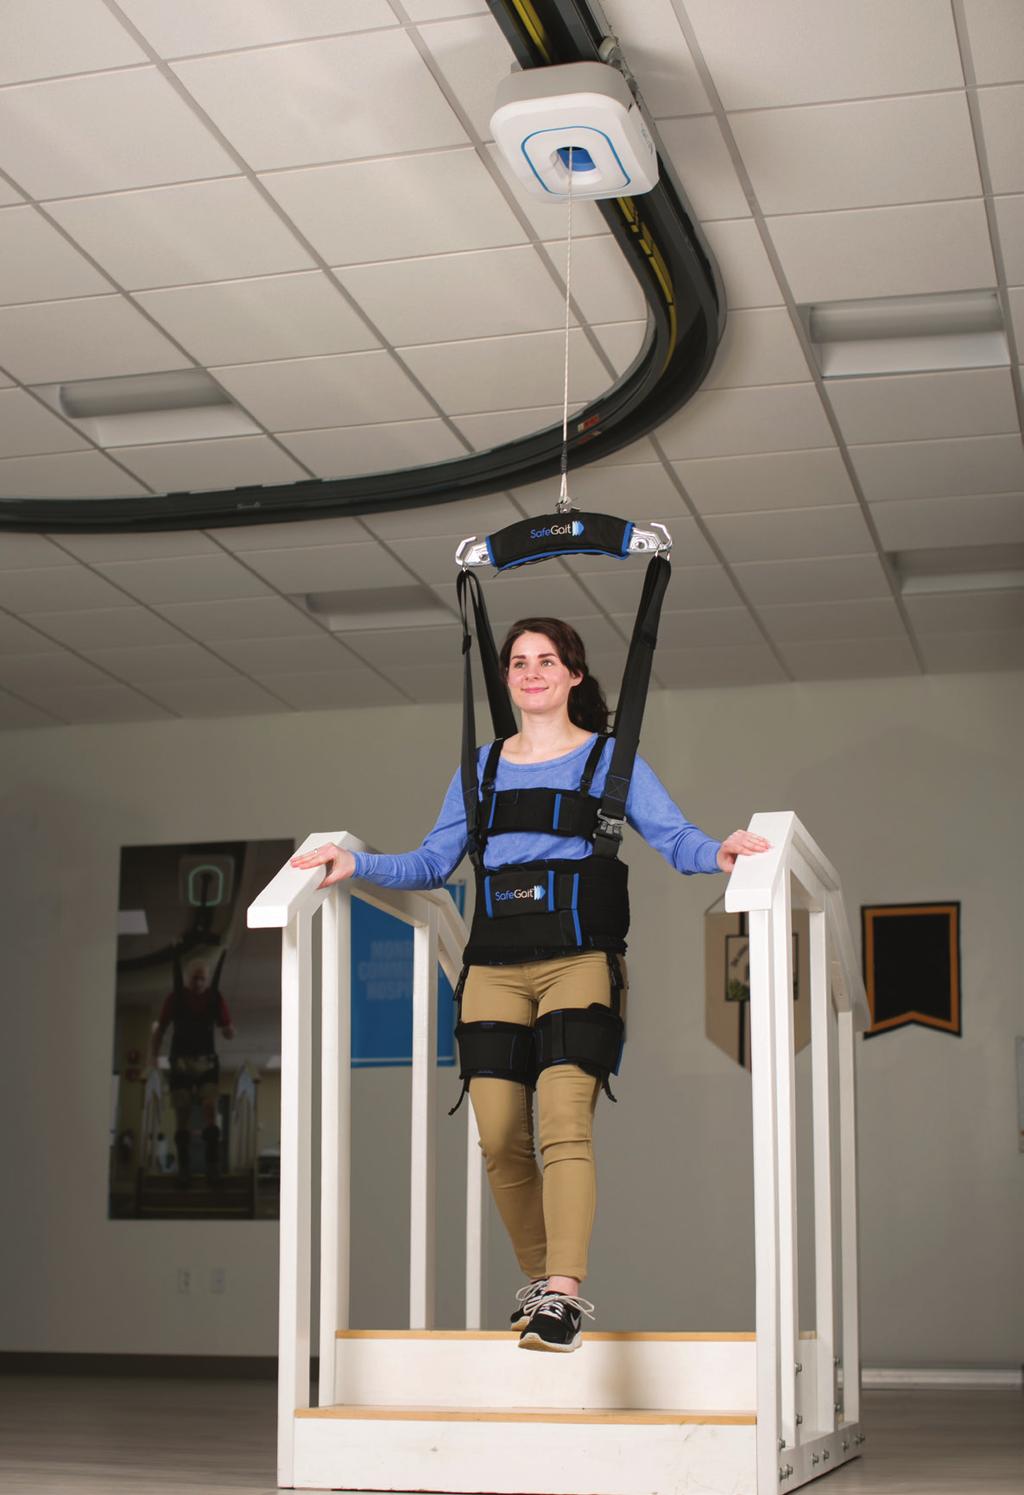 The SafeGait ACTIVE Dynamic Mobility Trainer Allows You To: ACTIVATE YOUR PATIENTS by promoting higher intensity therapy supported by proprietary fall protection technology and unlimited dynamic